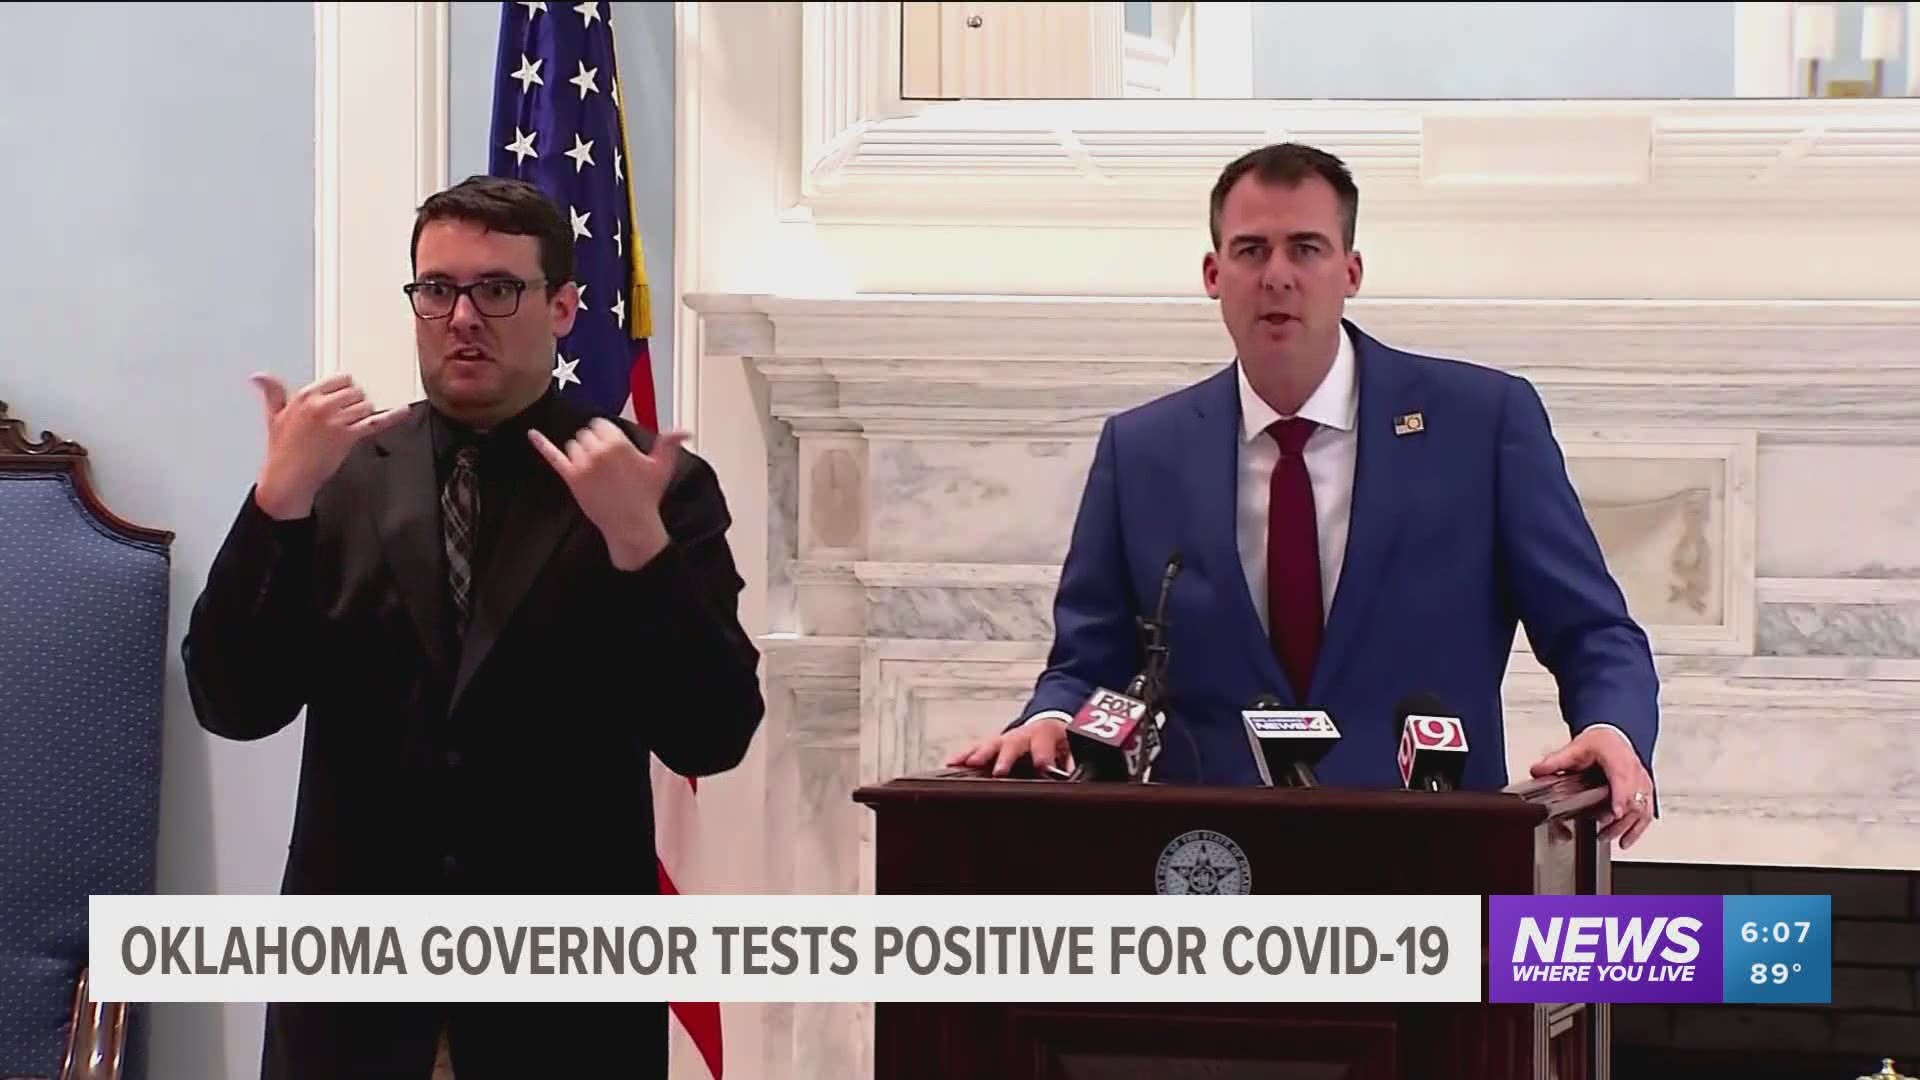 Oklahoma Governor tests positive for COVID-19